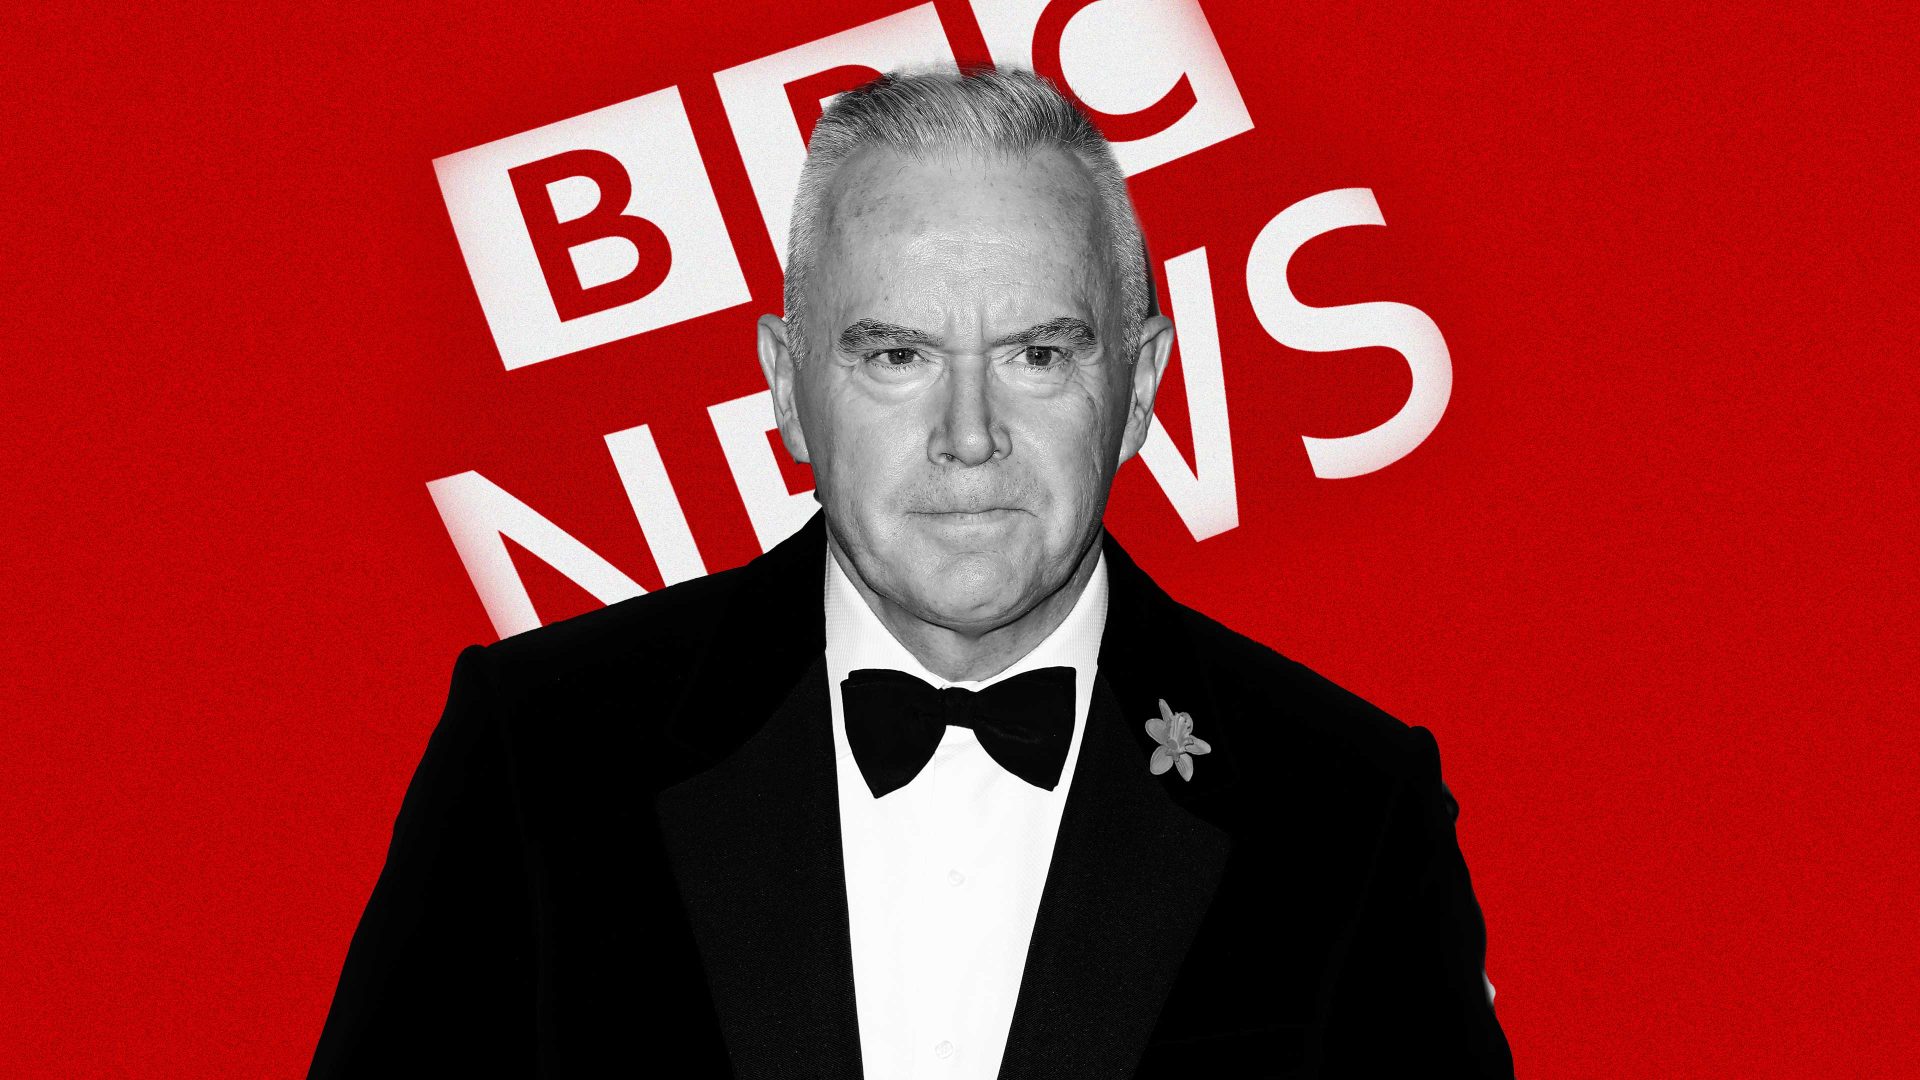 Huw Edwards’ BBC colleagues were quick to protect the presenter when his identity was revealed last Wednesday. Image: TNE/Getty